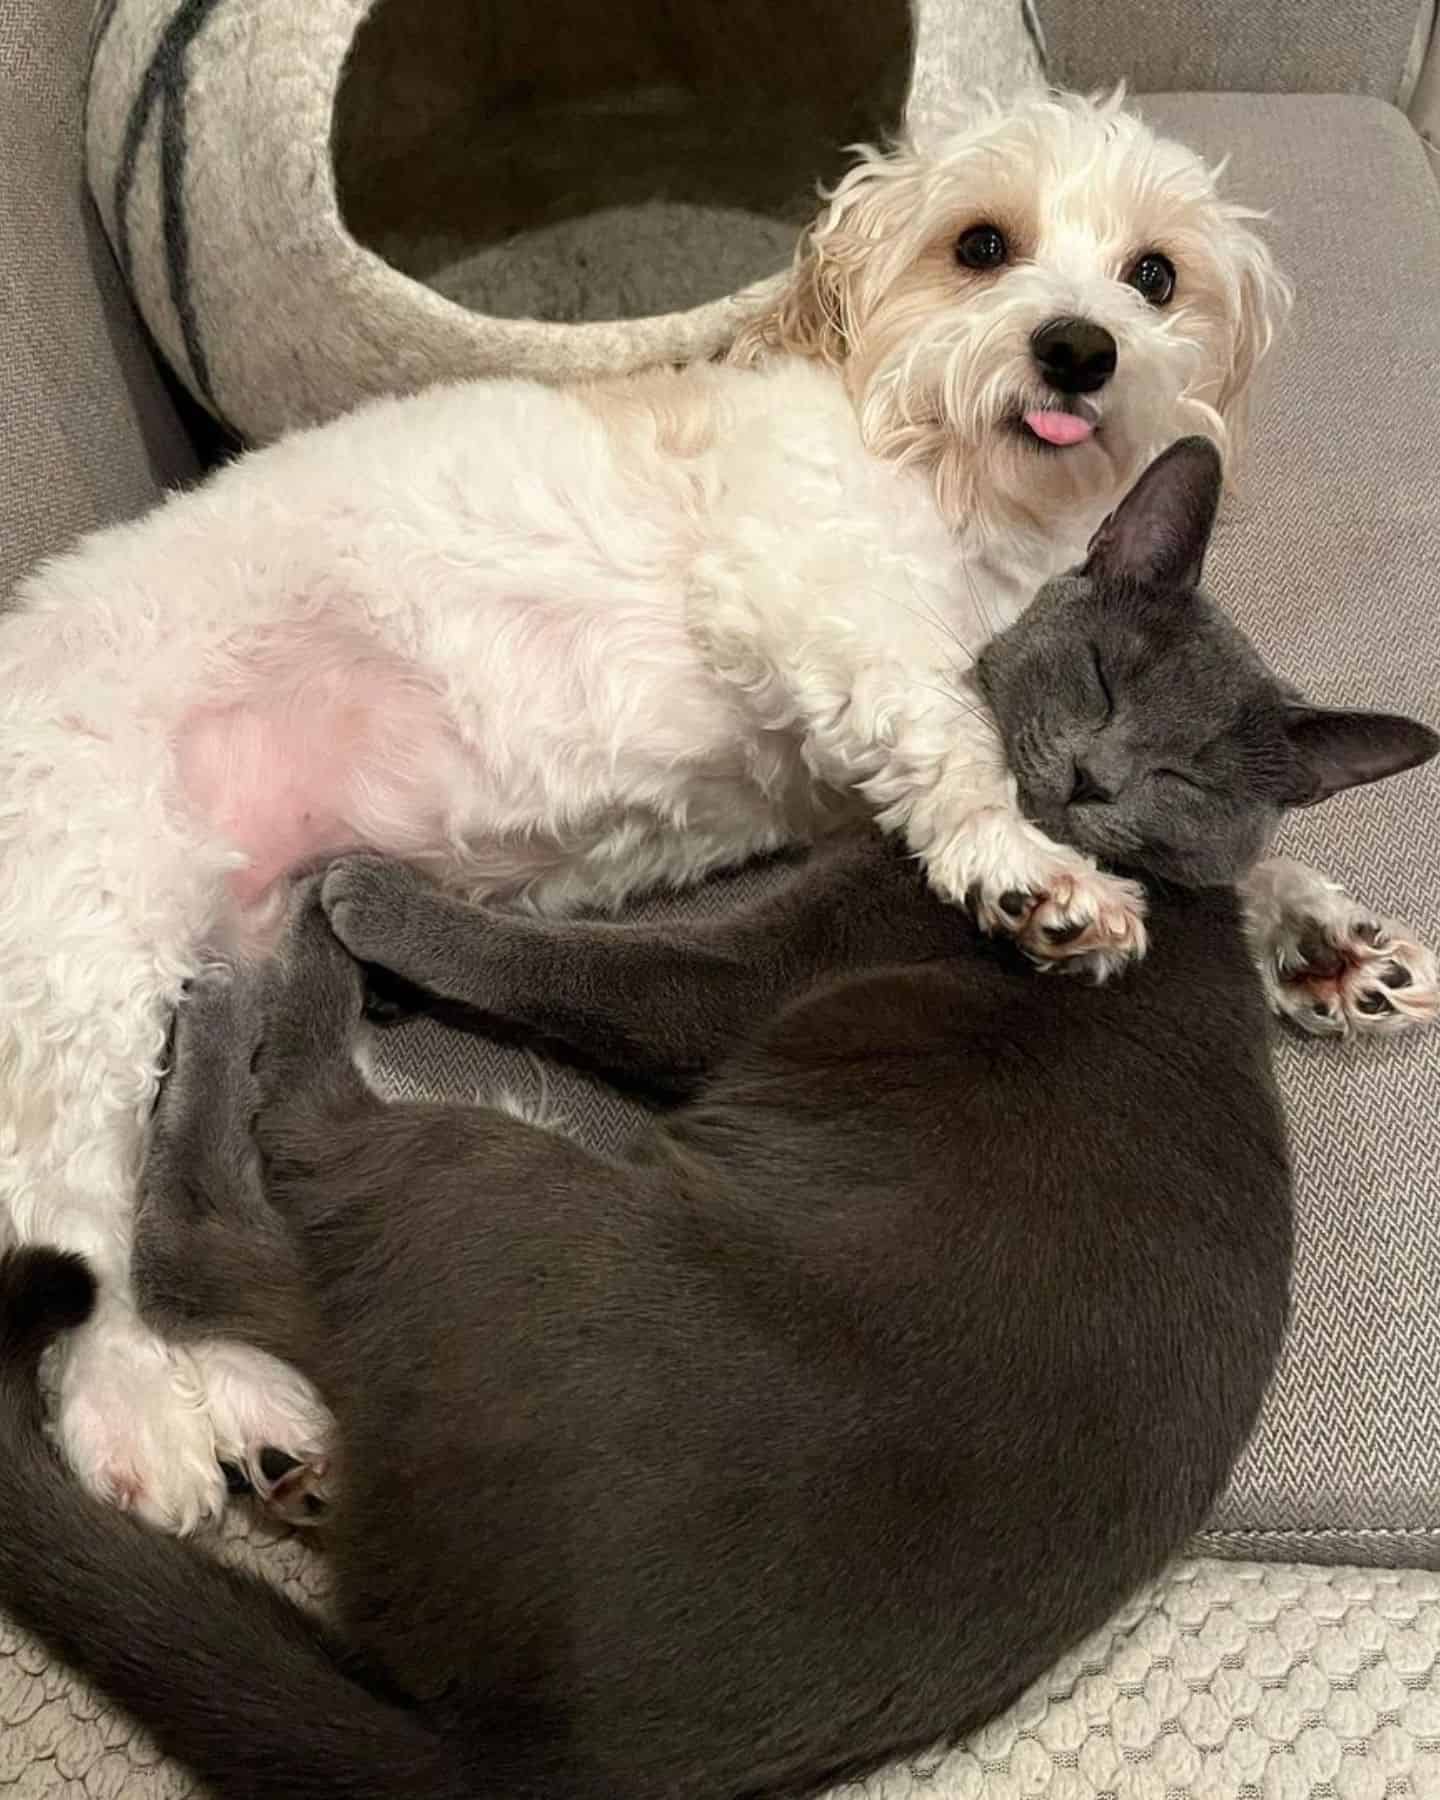 cat and dog hugging each other